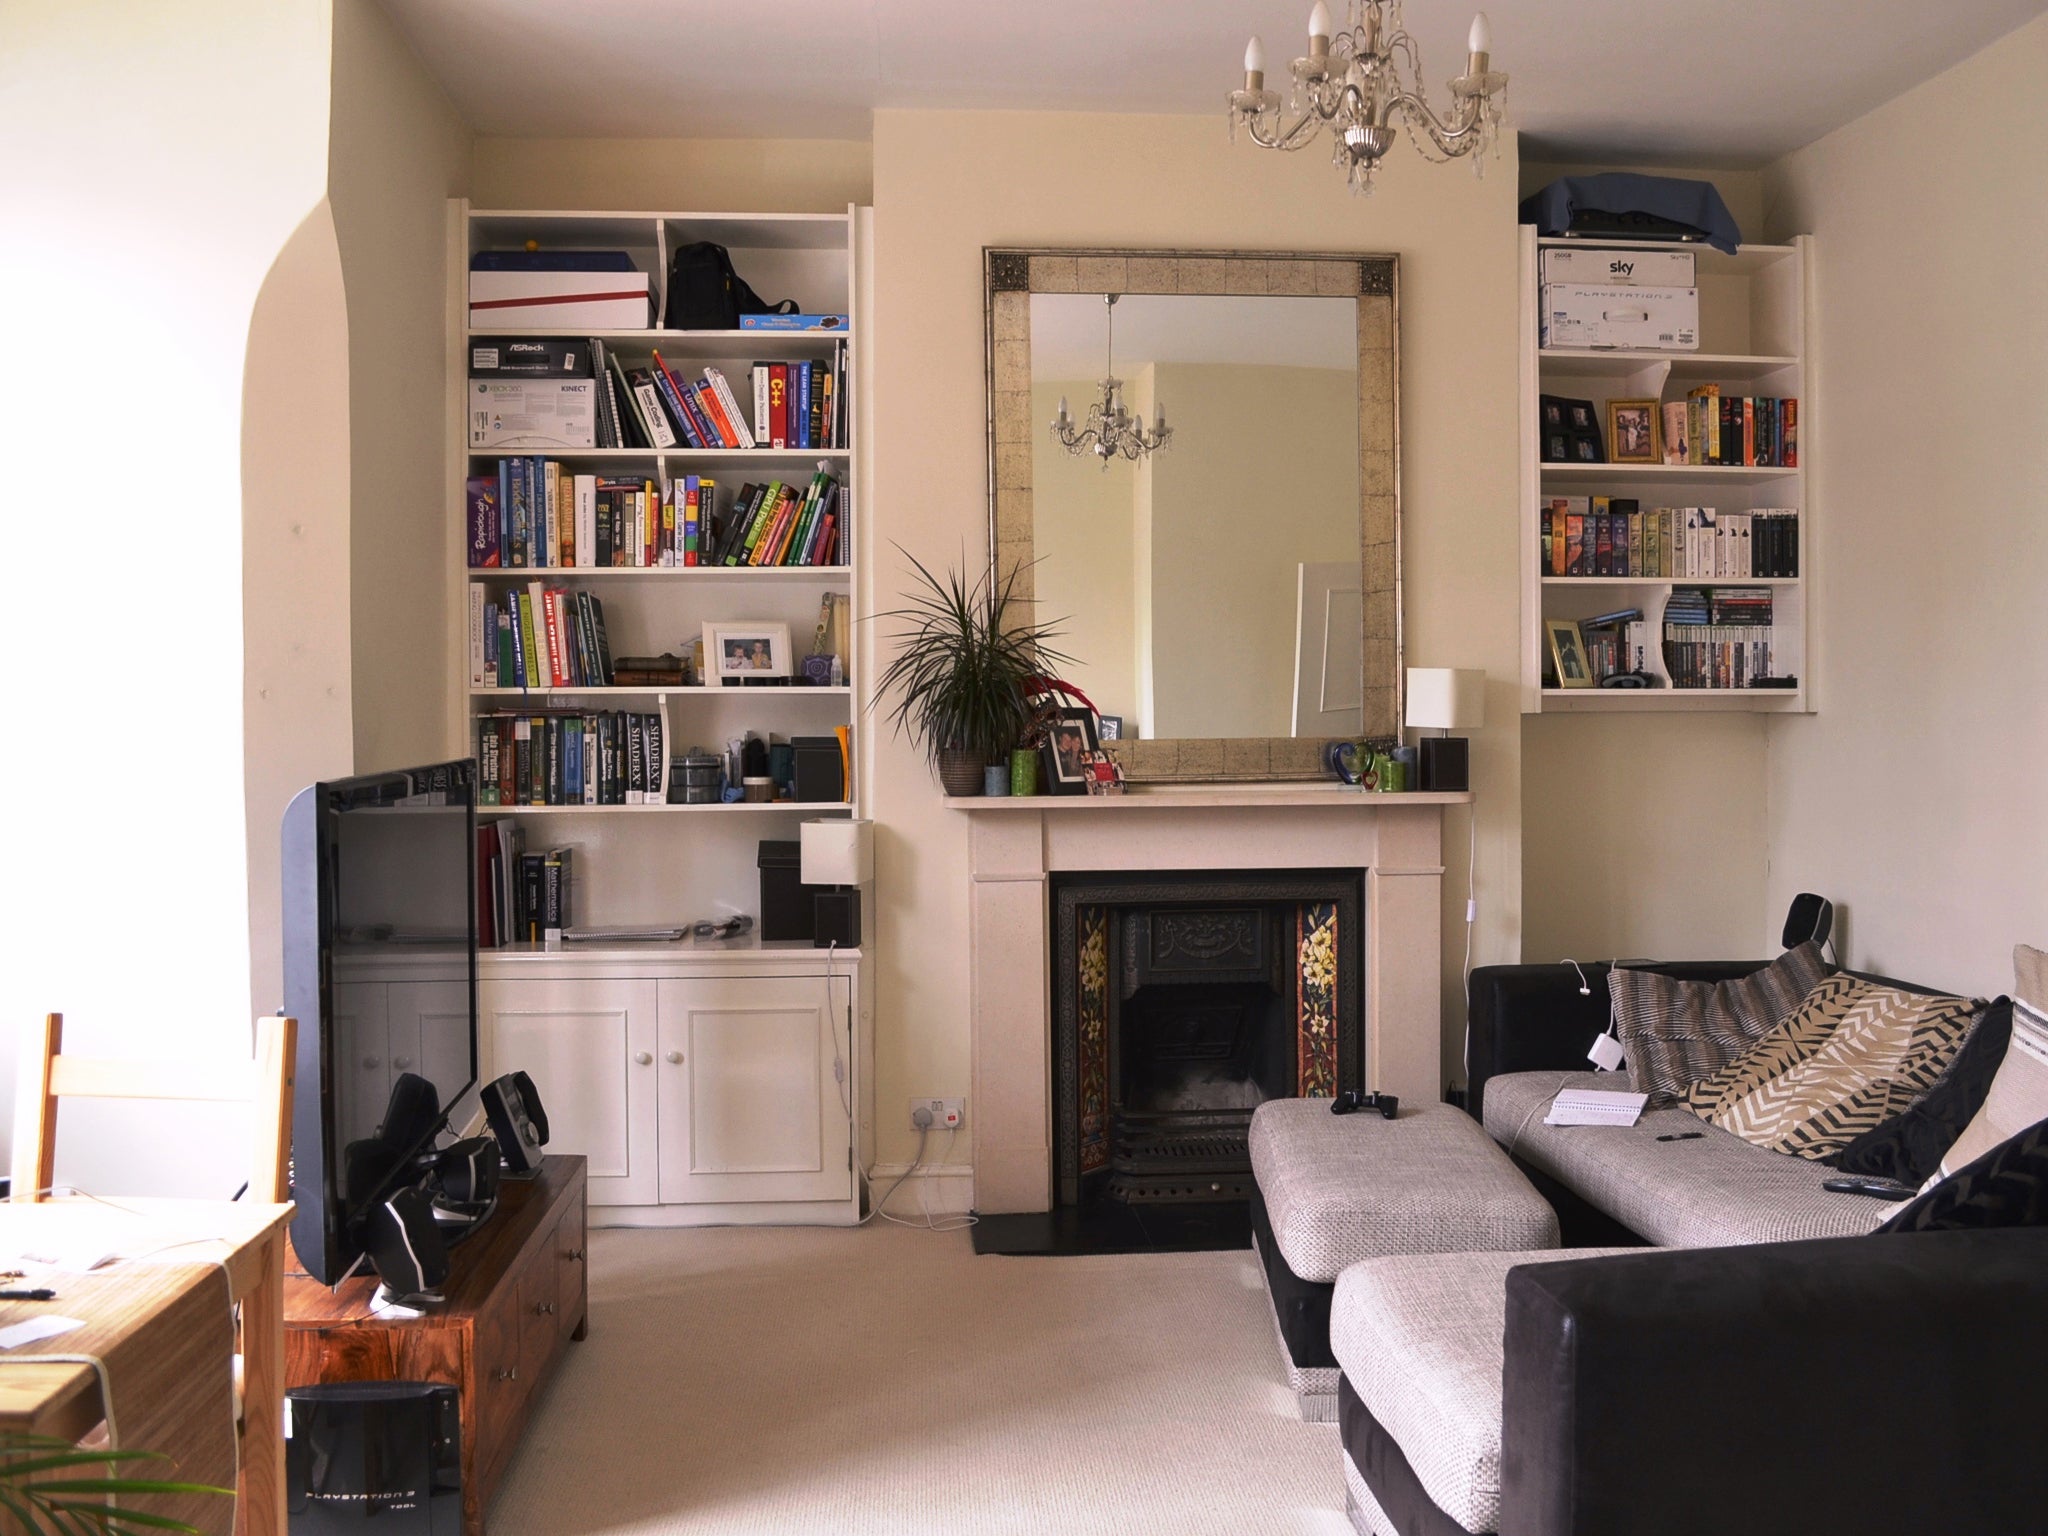 2 bedroom flat to rent in Glenloch Road, Belsize Park. On with Benham and Reeves for £475 per week.